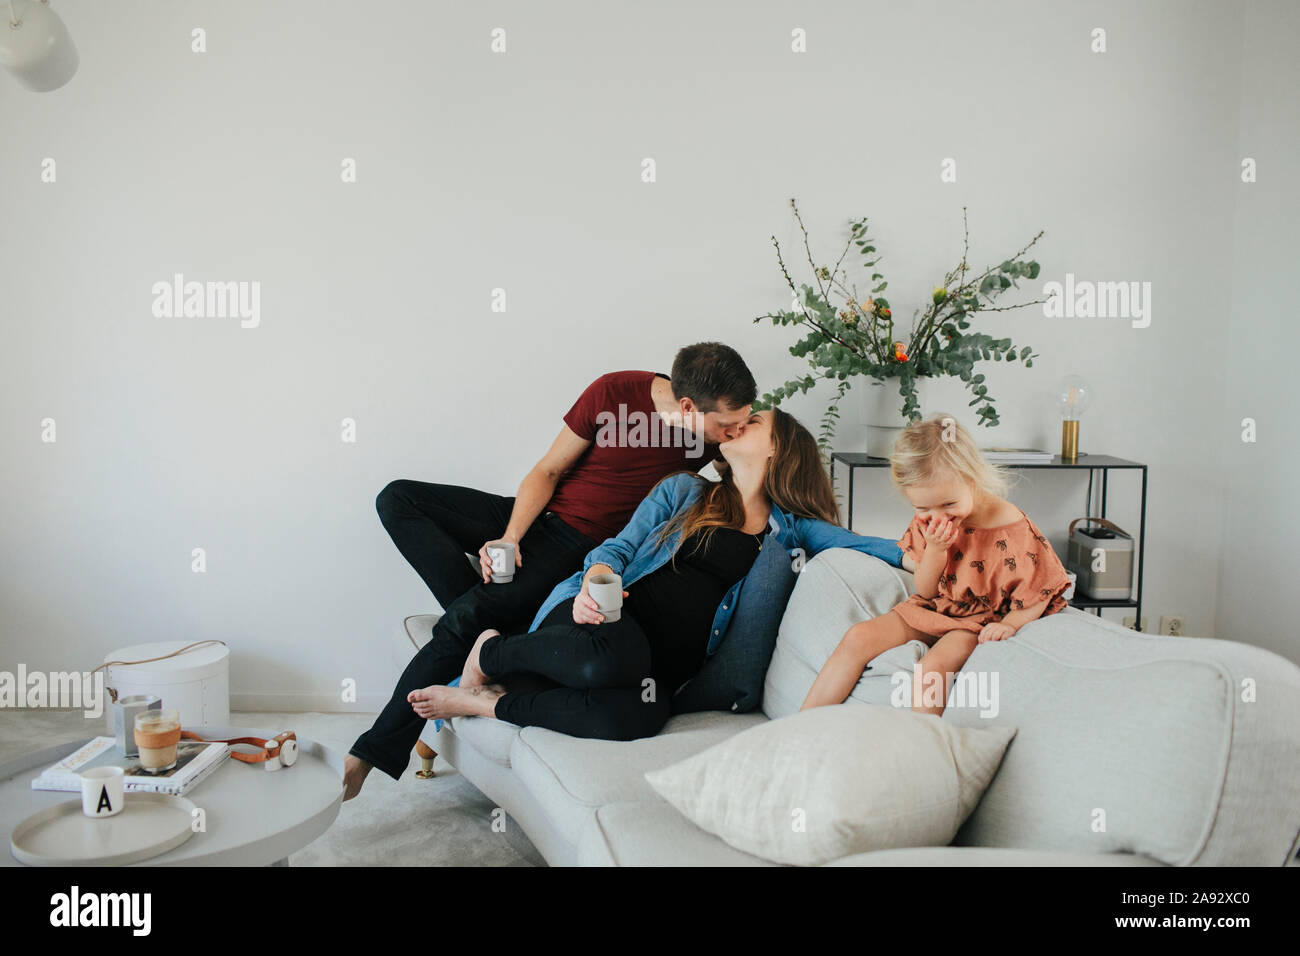 Family together Stock Photo